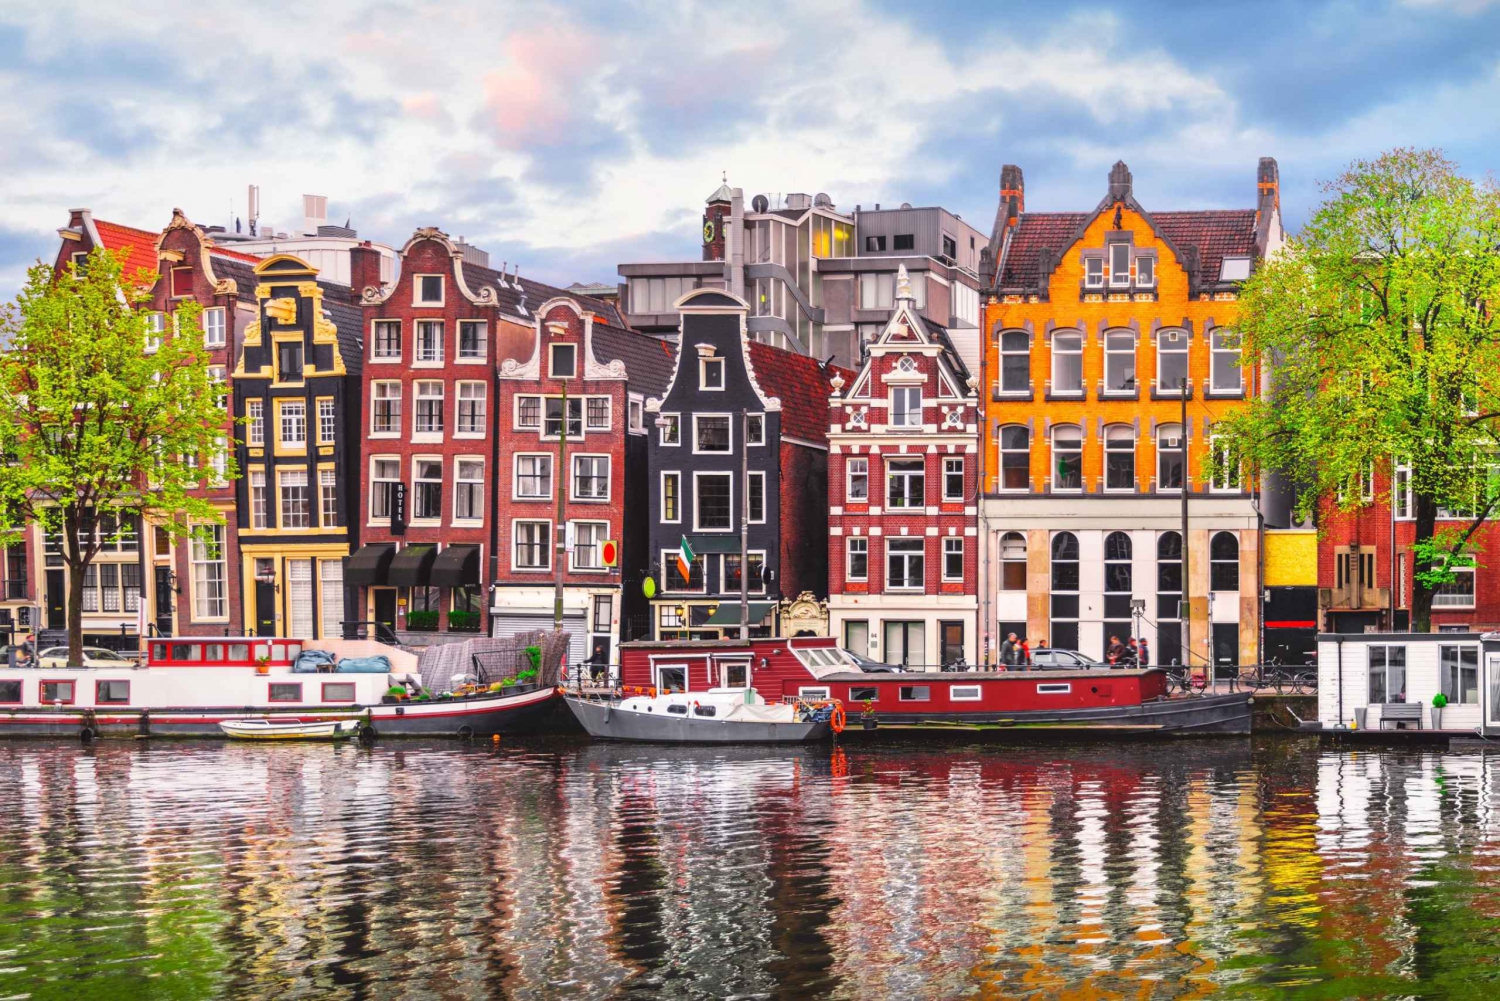 Amsterdam: The Best of Amsterdam Walking Tour